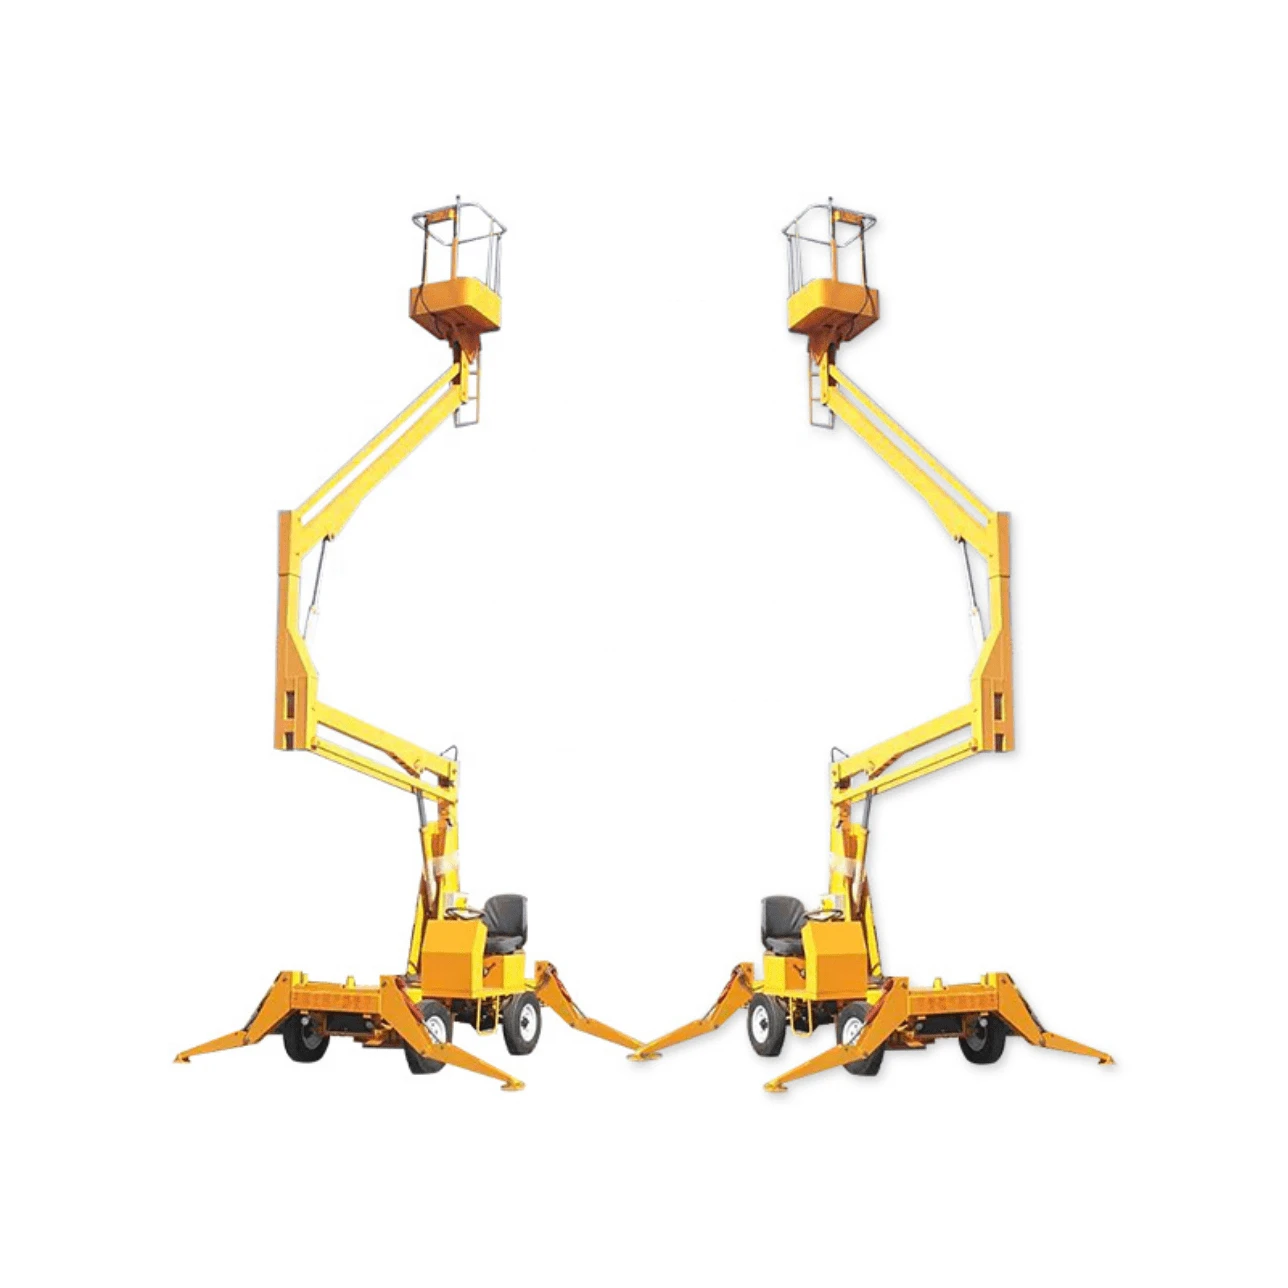 Self propelled Adjustable Mobile Curved Arm Aerial Working Telescopic Platform